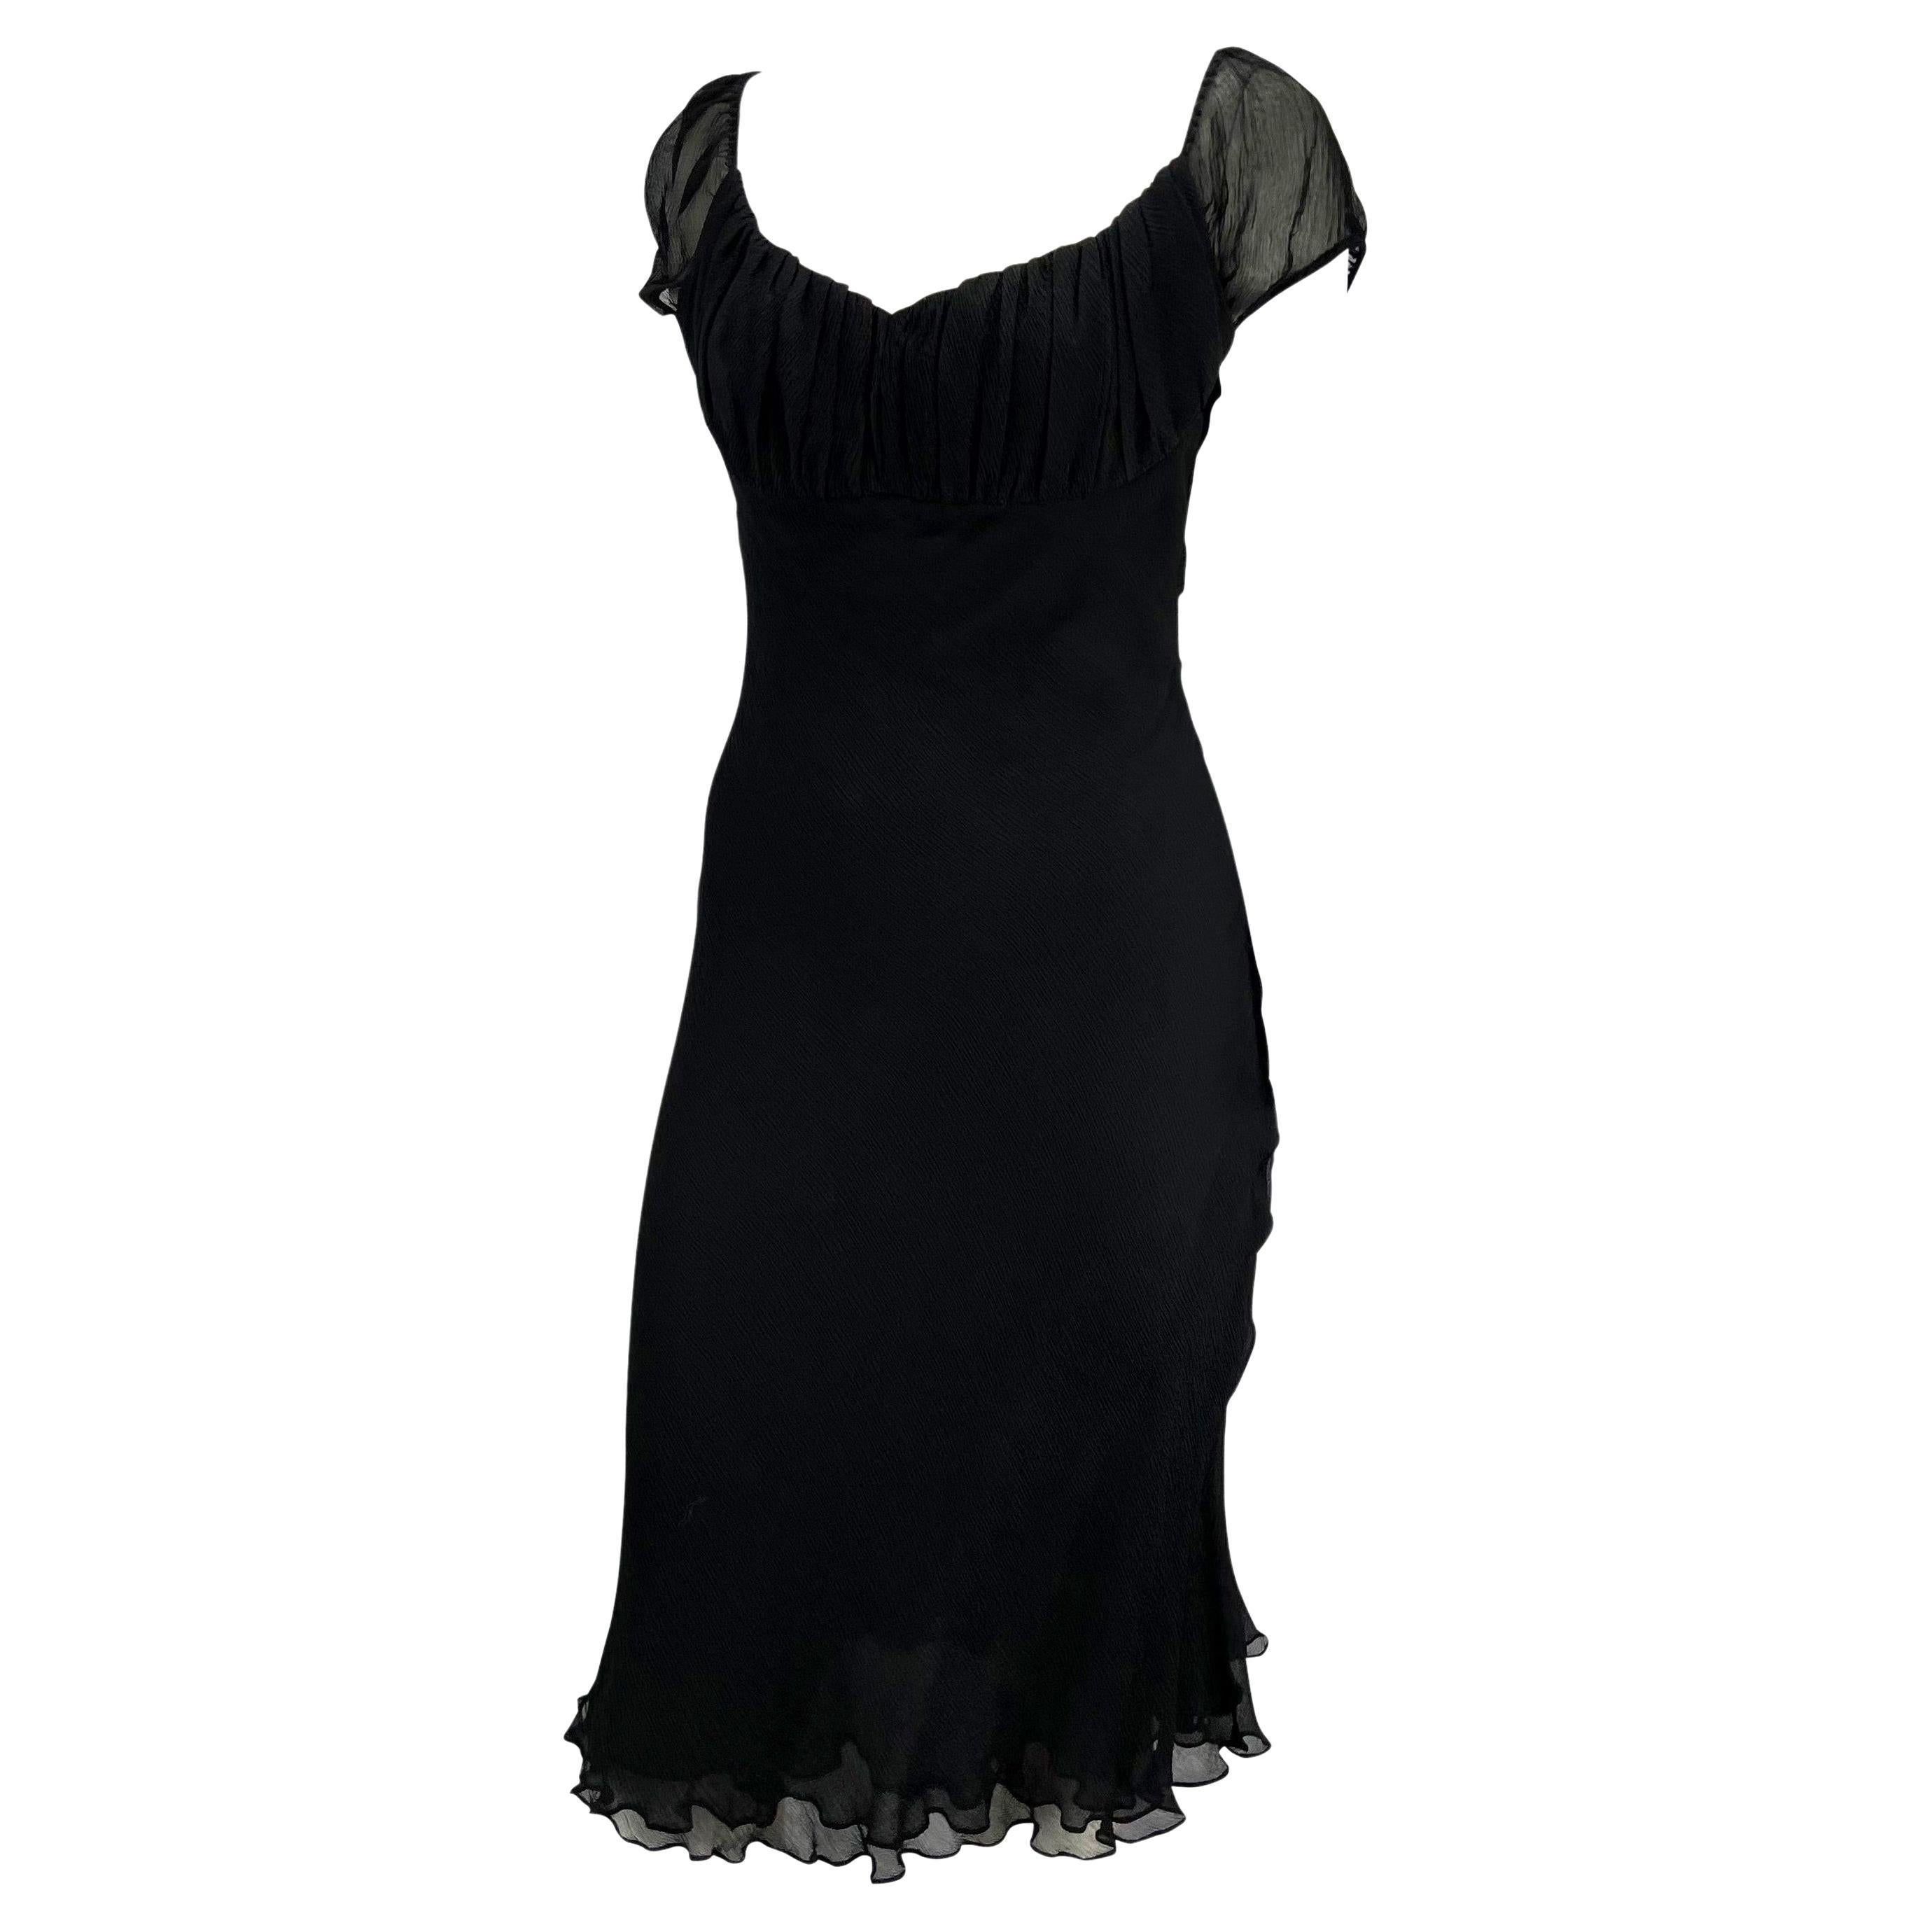 TheRealList presents: a sheer cap-sleeved cocktail dress in black crepe silk designed by Tom Ford for Gucci's Spring/Summer 2000 collection. With sheer fabric at the back and arms, the delicate black silk flows into a flirty ruffle hem. Add this